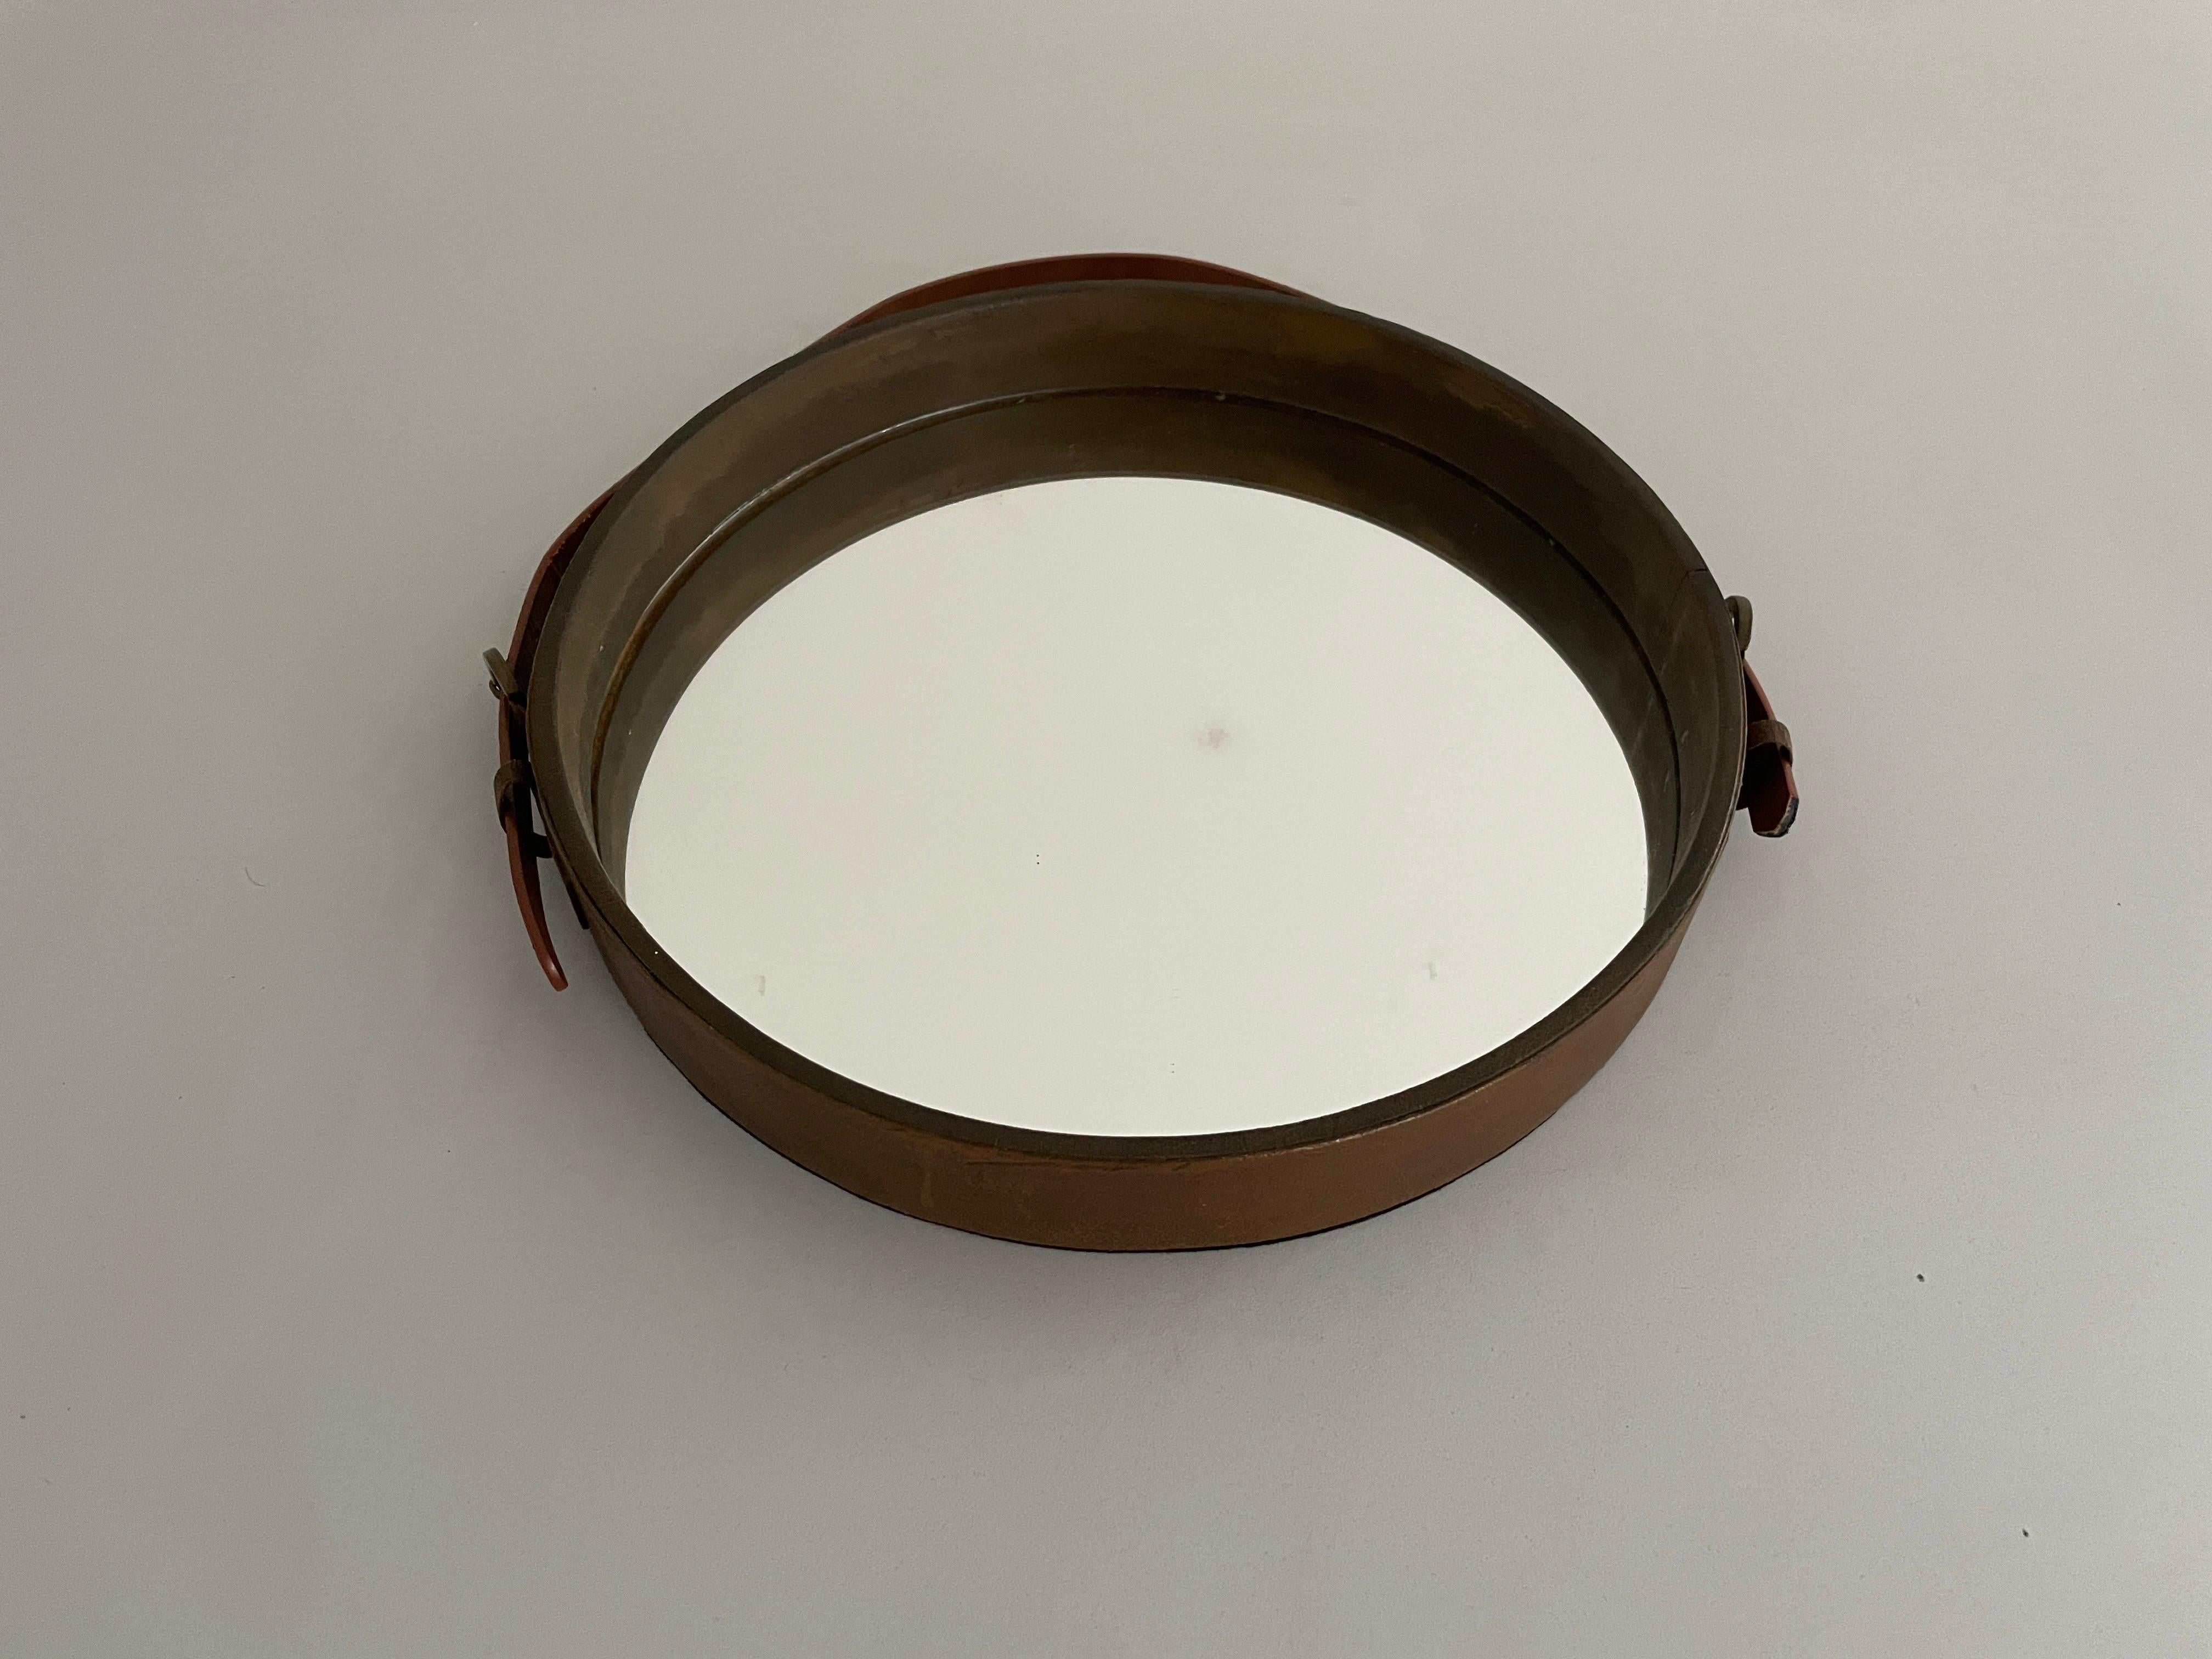 Round Leather Wall Mirror with Leather Strap, 1960s, Italy

It is very ideal and suitable for all living areas.

No damage, no crack.
Wear consistent with age and use.

Measurements: 
Diameter: 30 cm
Depth: 4 cm